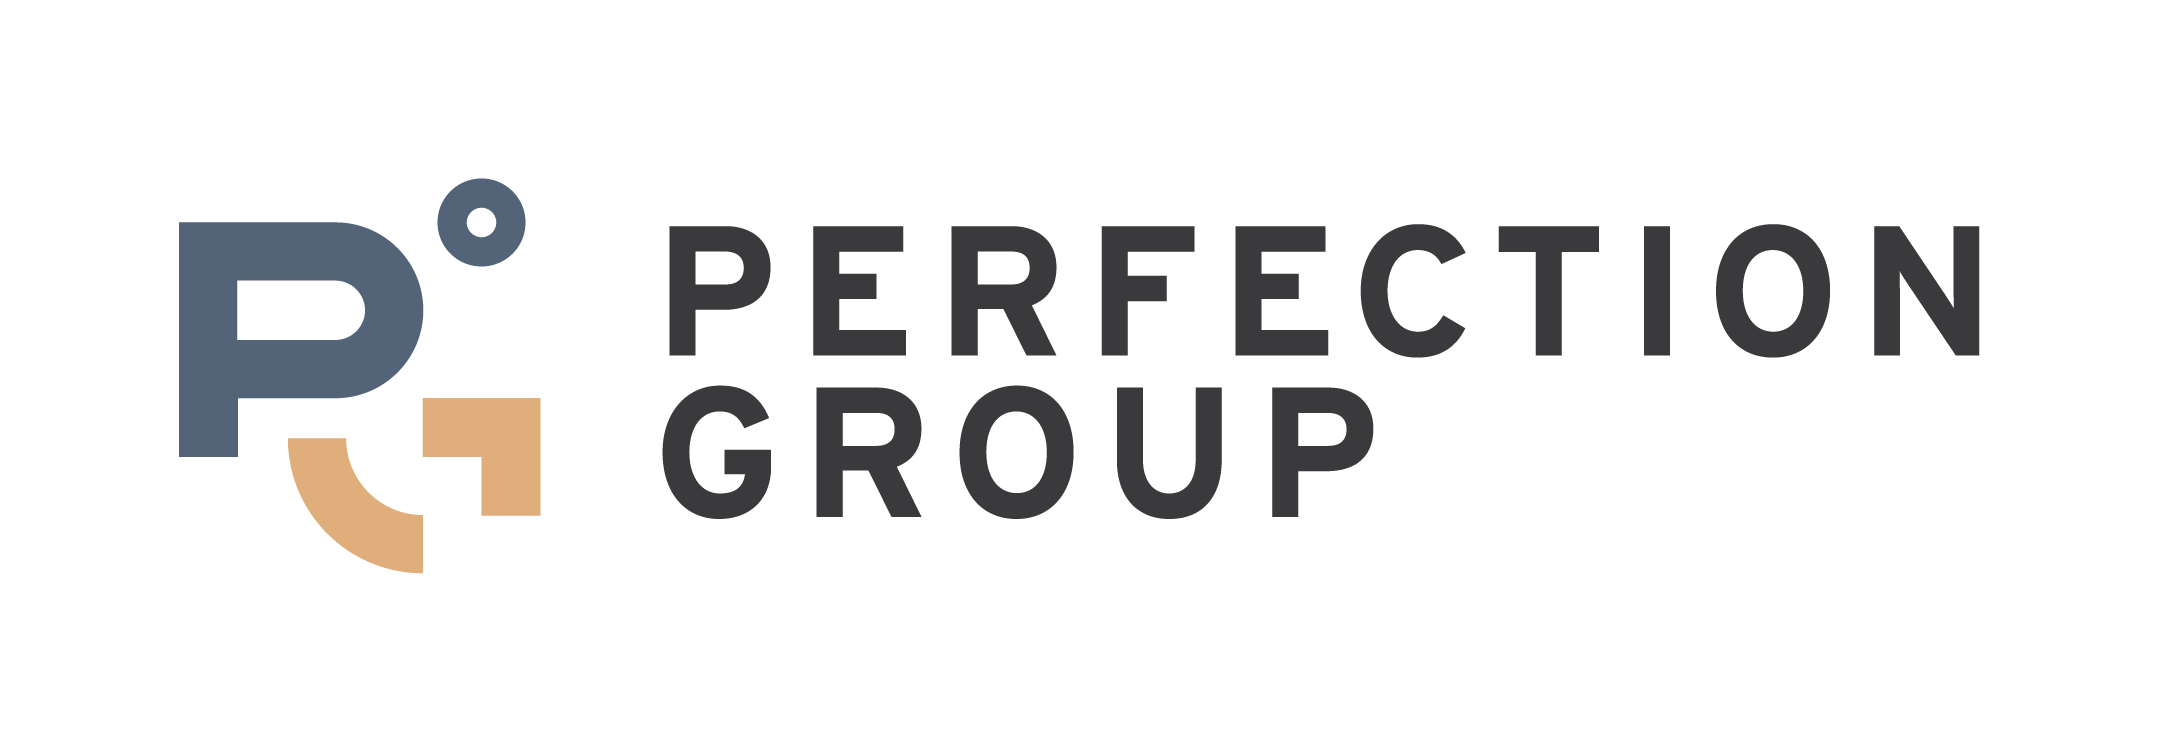 Perfection Group logo